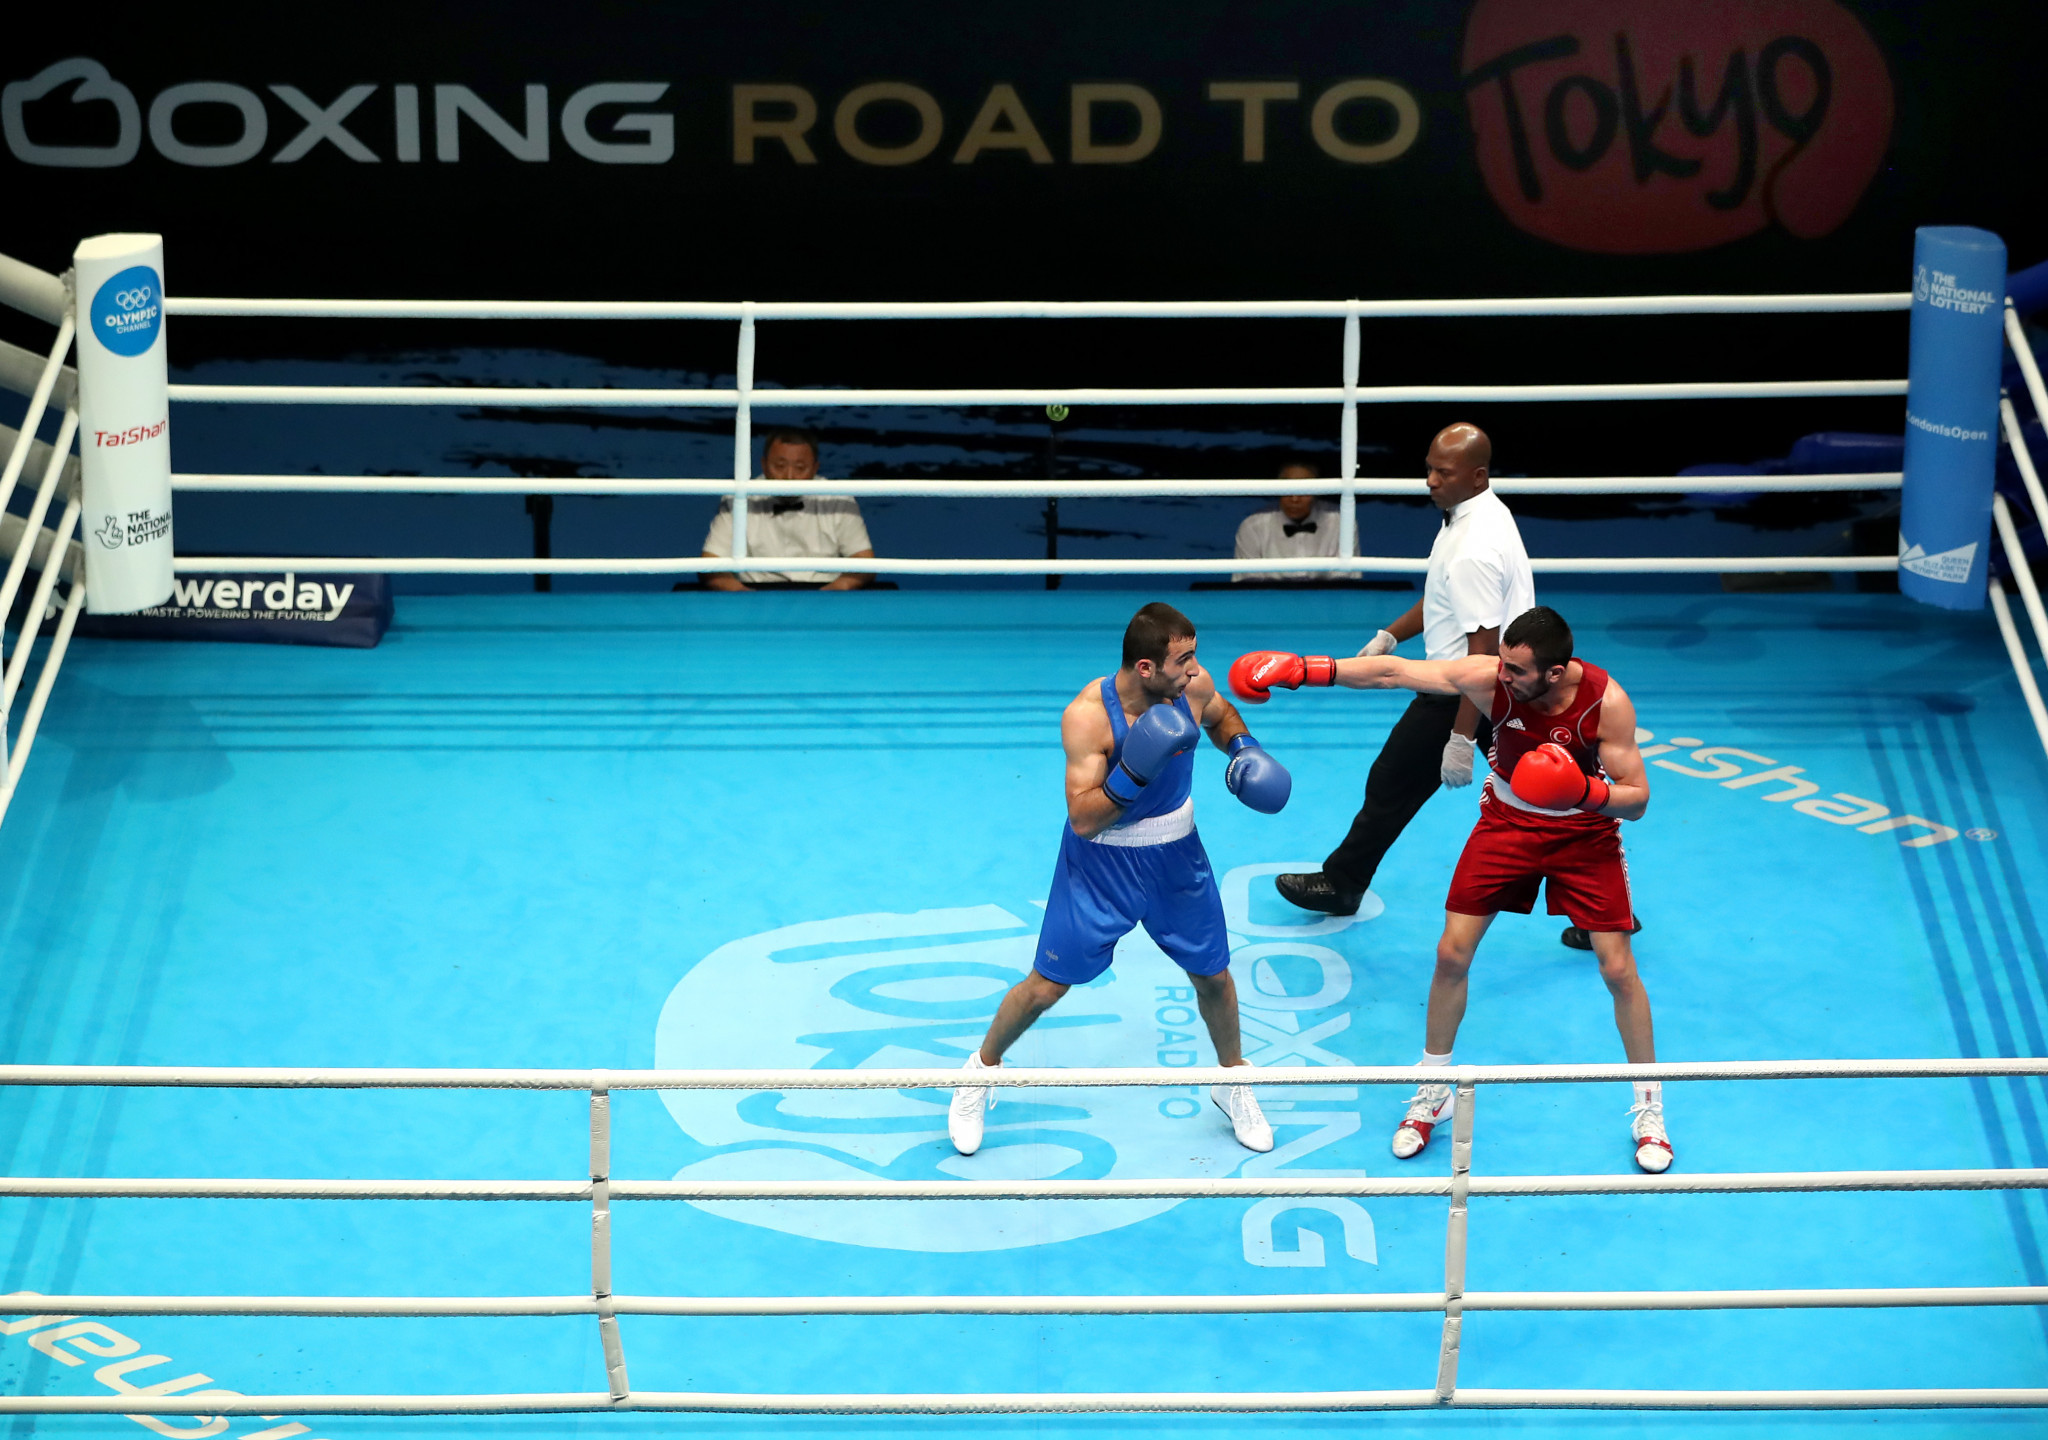 The IOC Boxing Taskforce has been criticised for allowing the event to take place ©Getty Images